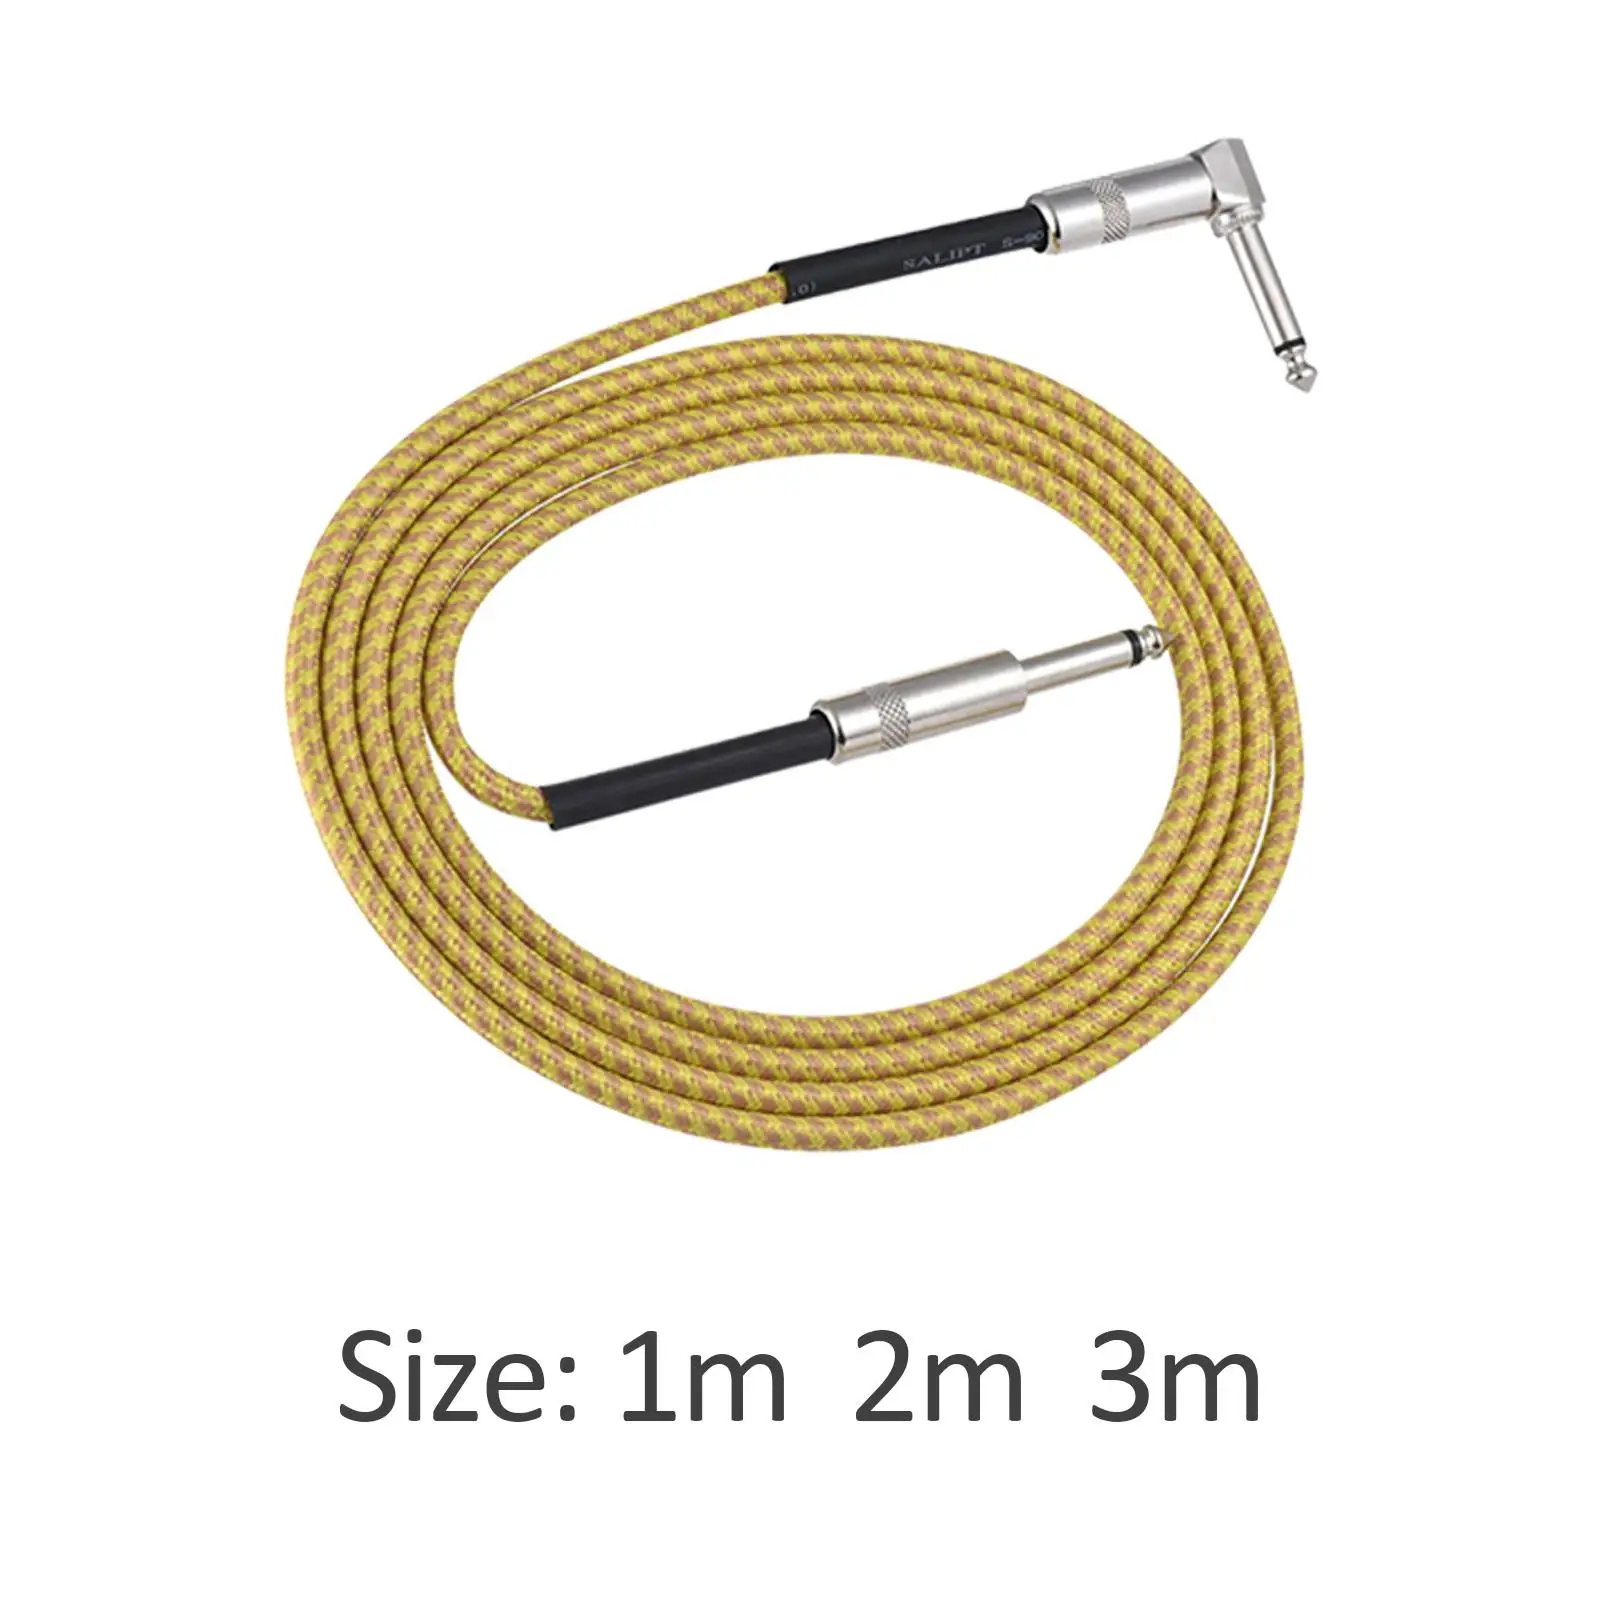 Shielded Guitar Cable Noise Reduction 6.35mm for Keyboard Equalizer Electronic Drum